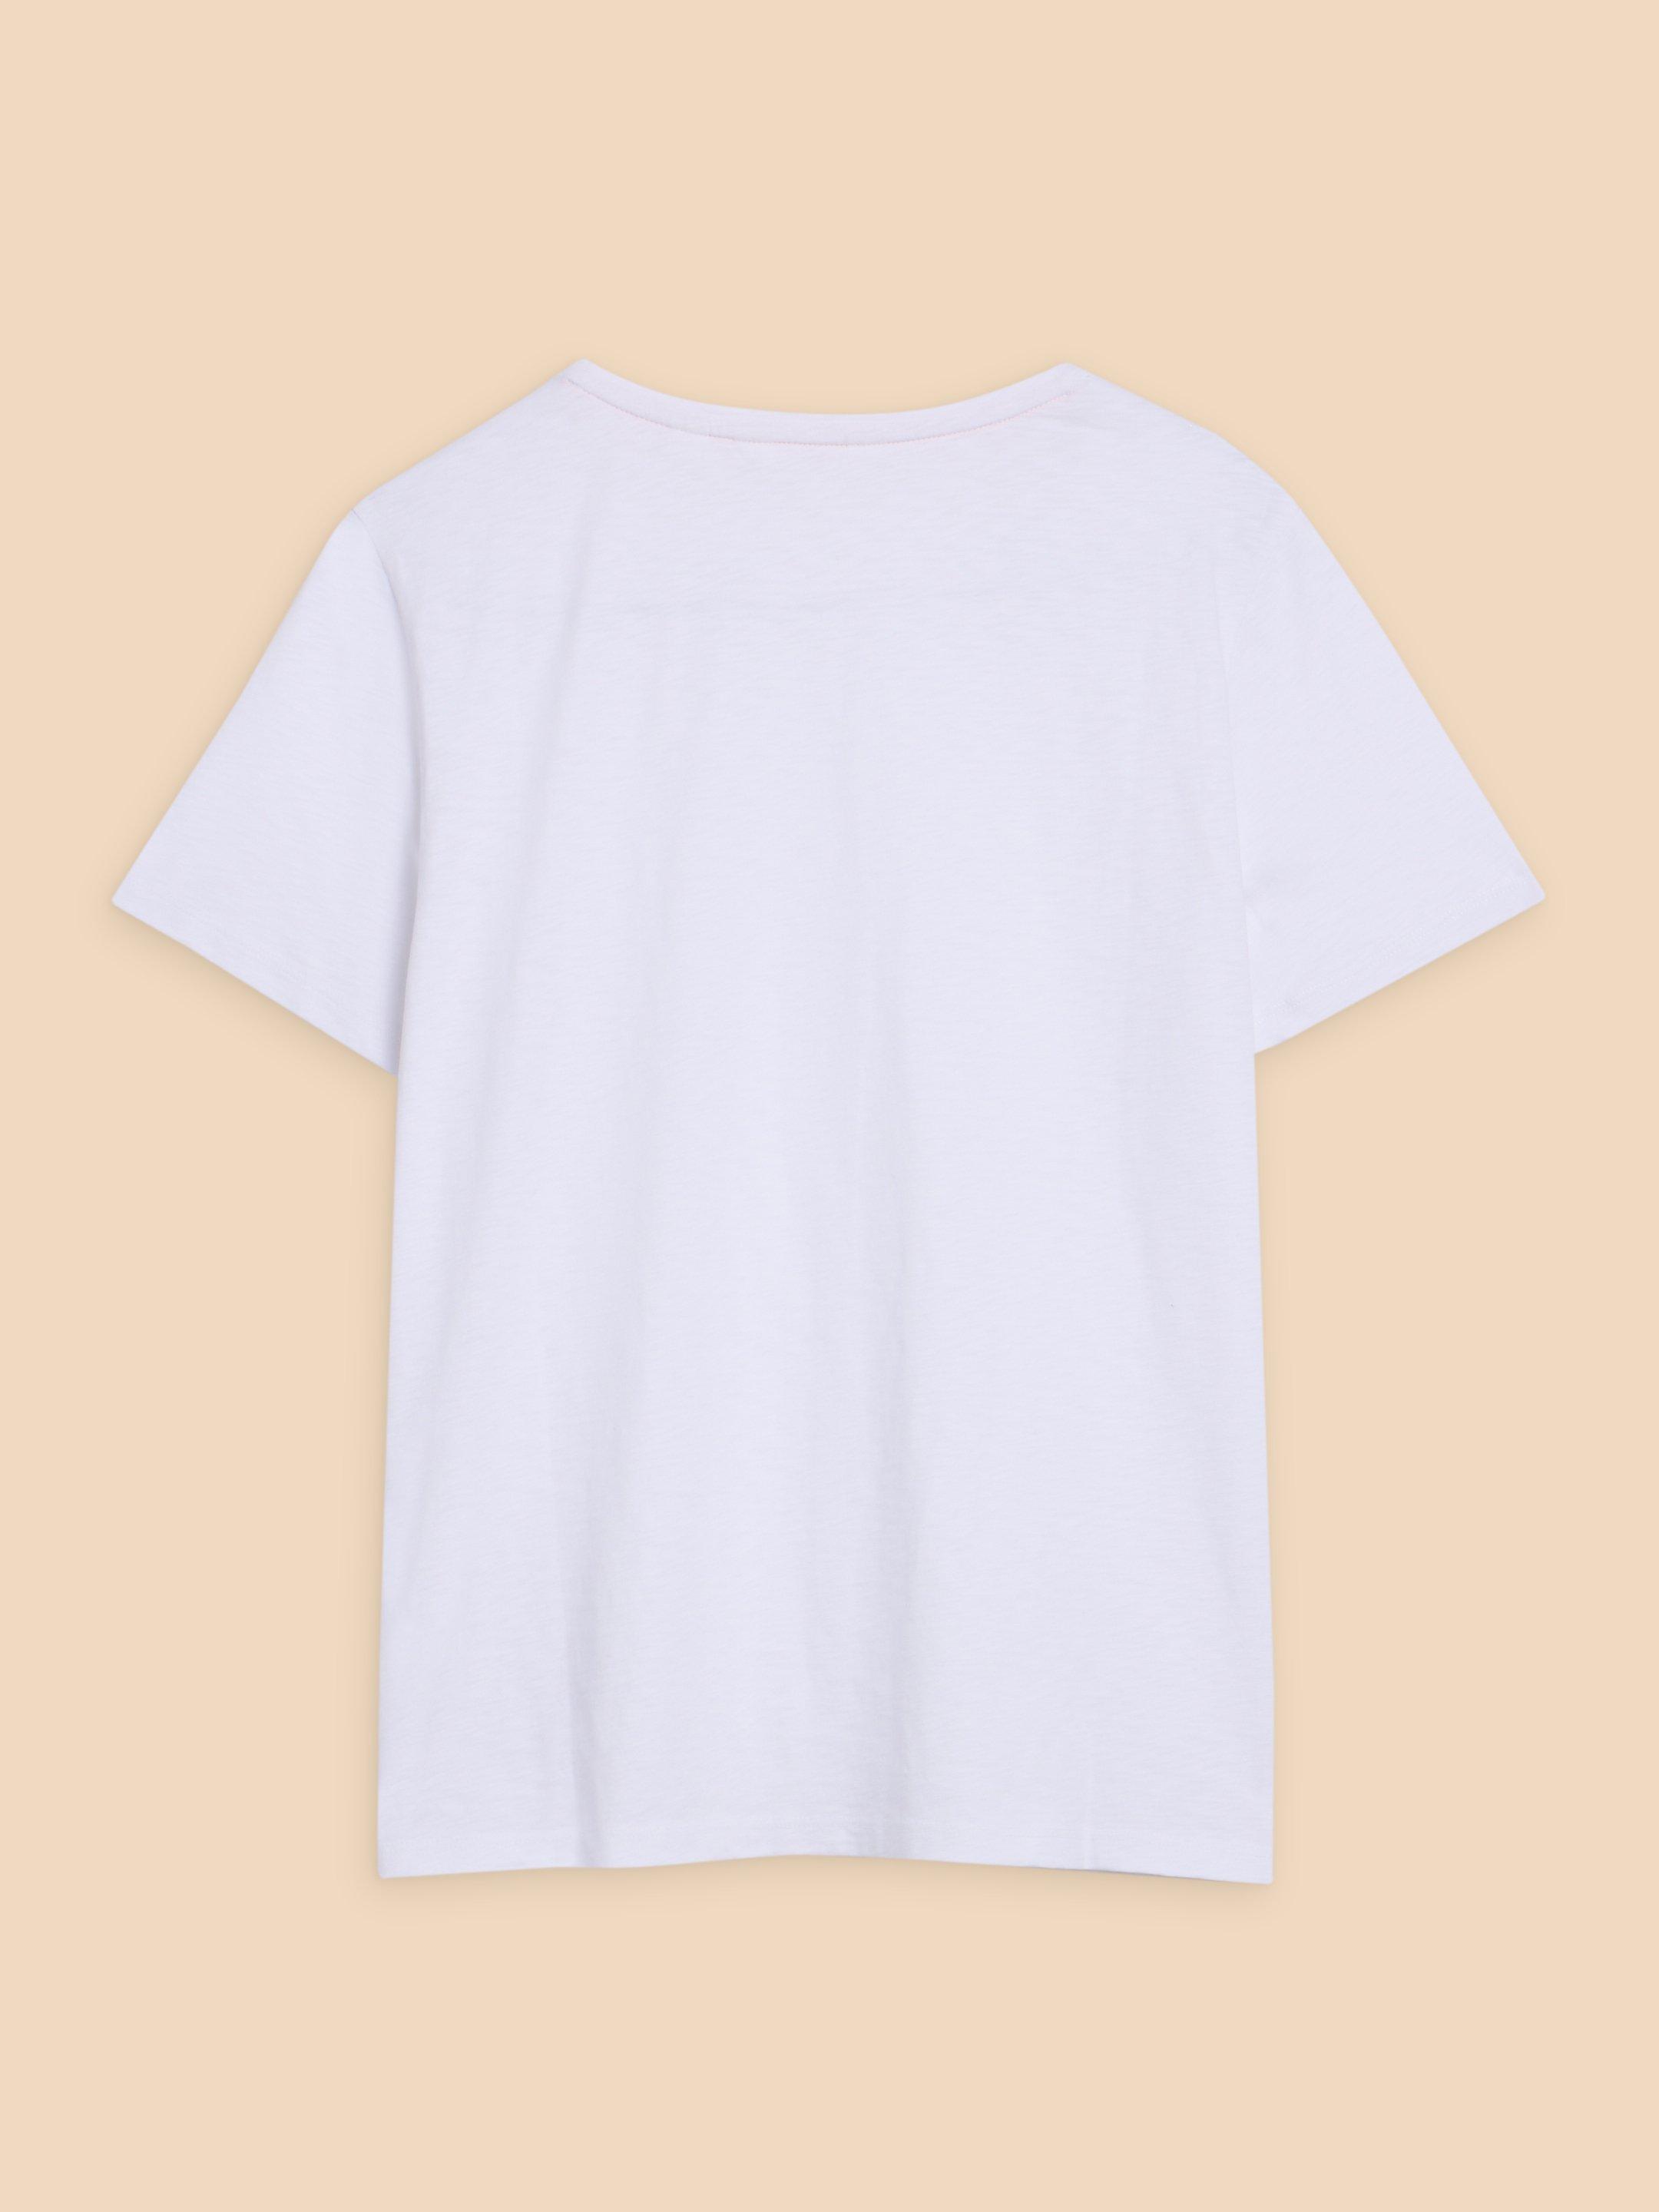 ABBIE TEE in BRIL WHITE - FLAT BACK